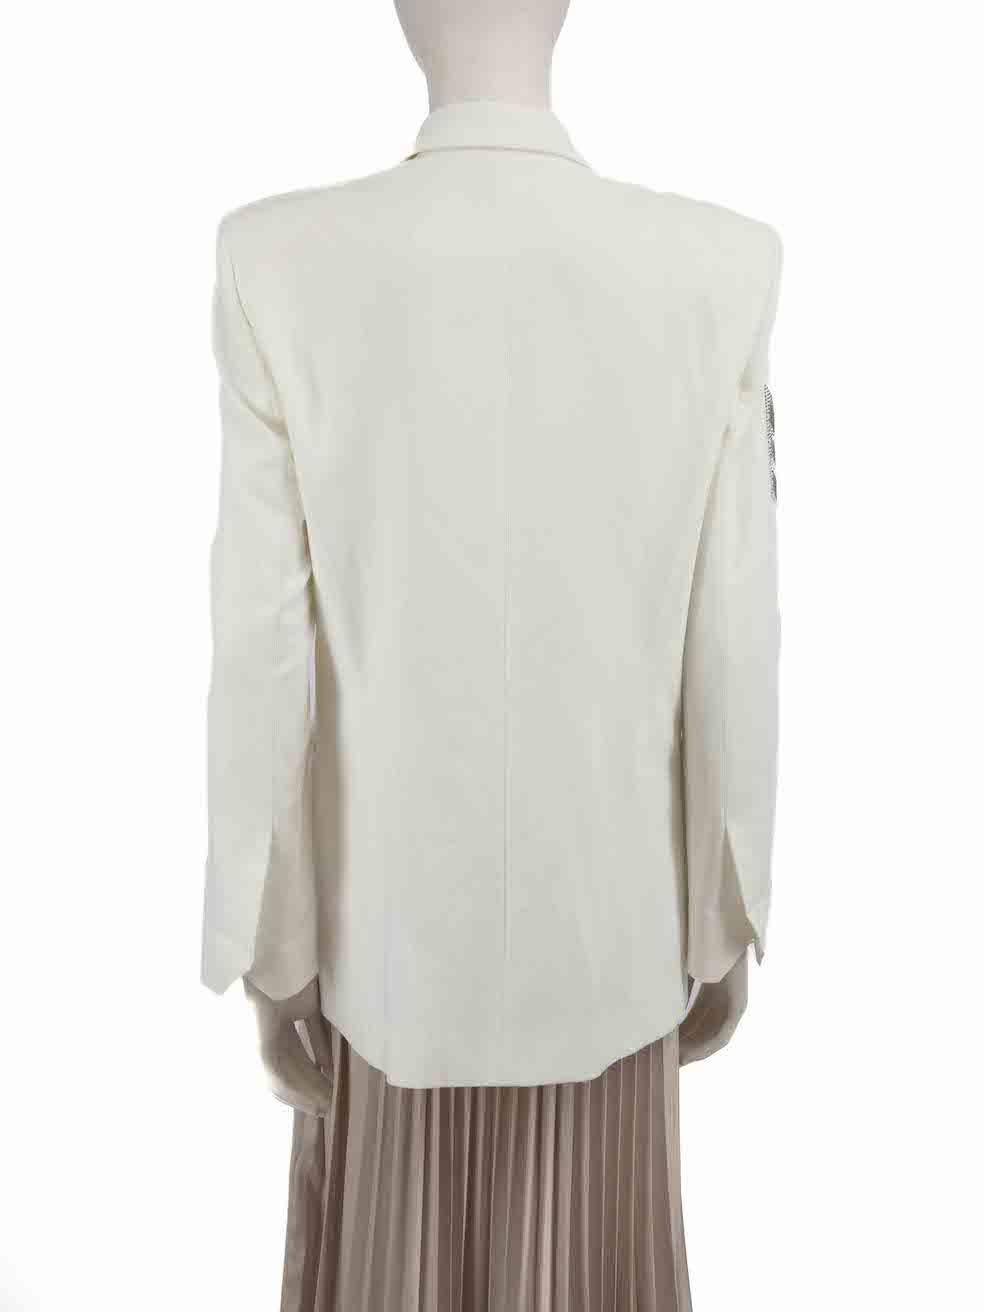 Zadig & Voltaire White Embellished Blazer Size XL In Good Condition For Sale In London, GB